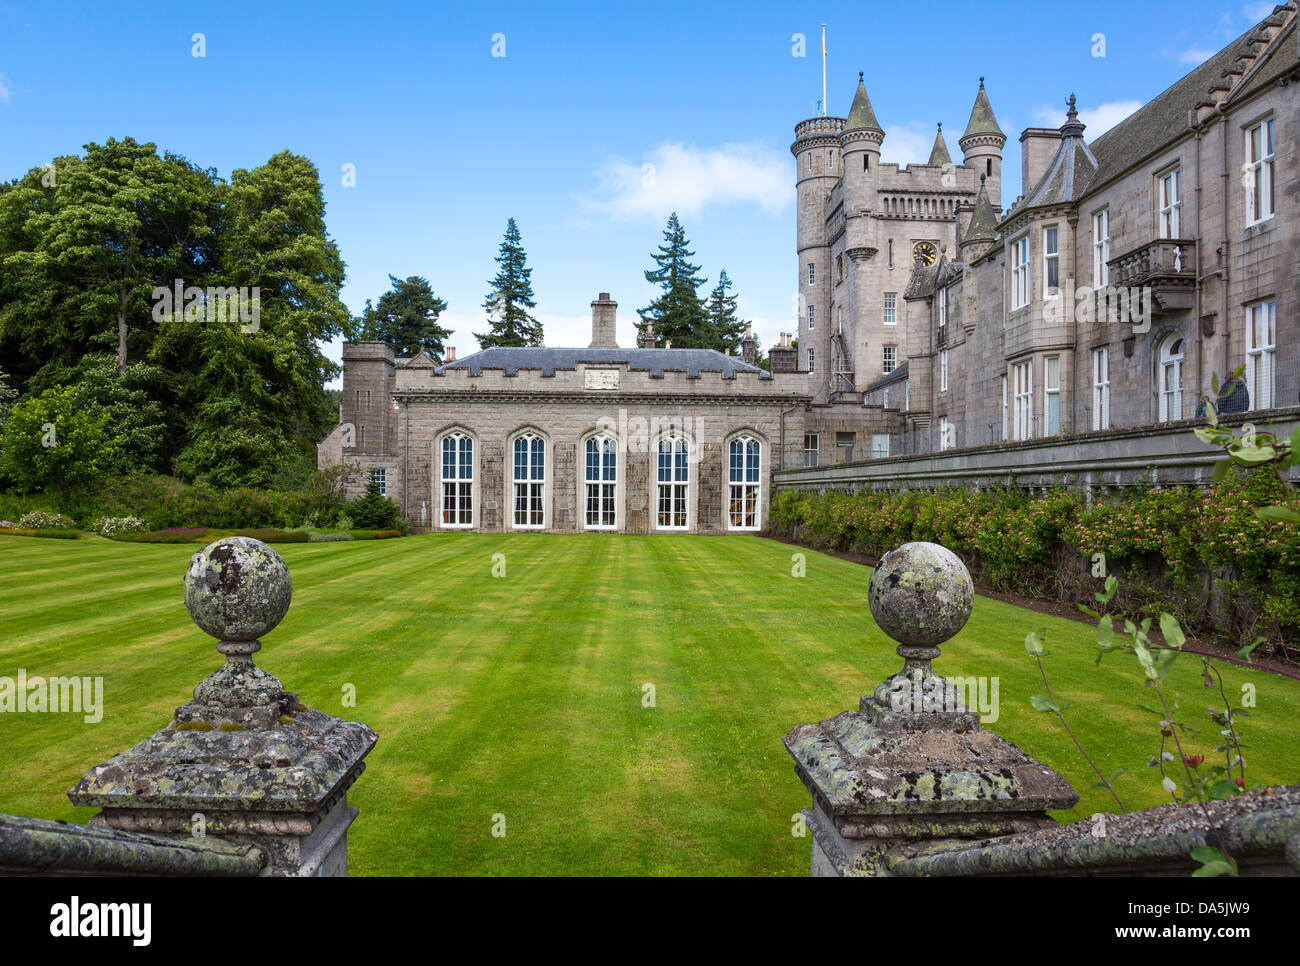 Europe Great Britain, Scotland, Aberdeenshire, the Balmoral castle, summer residence of the British Royal Family. Stock Photo